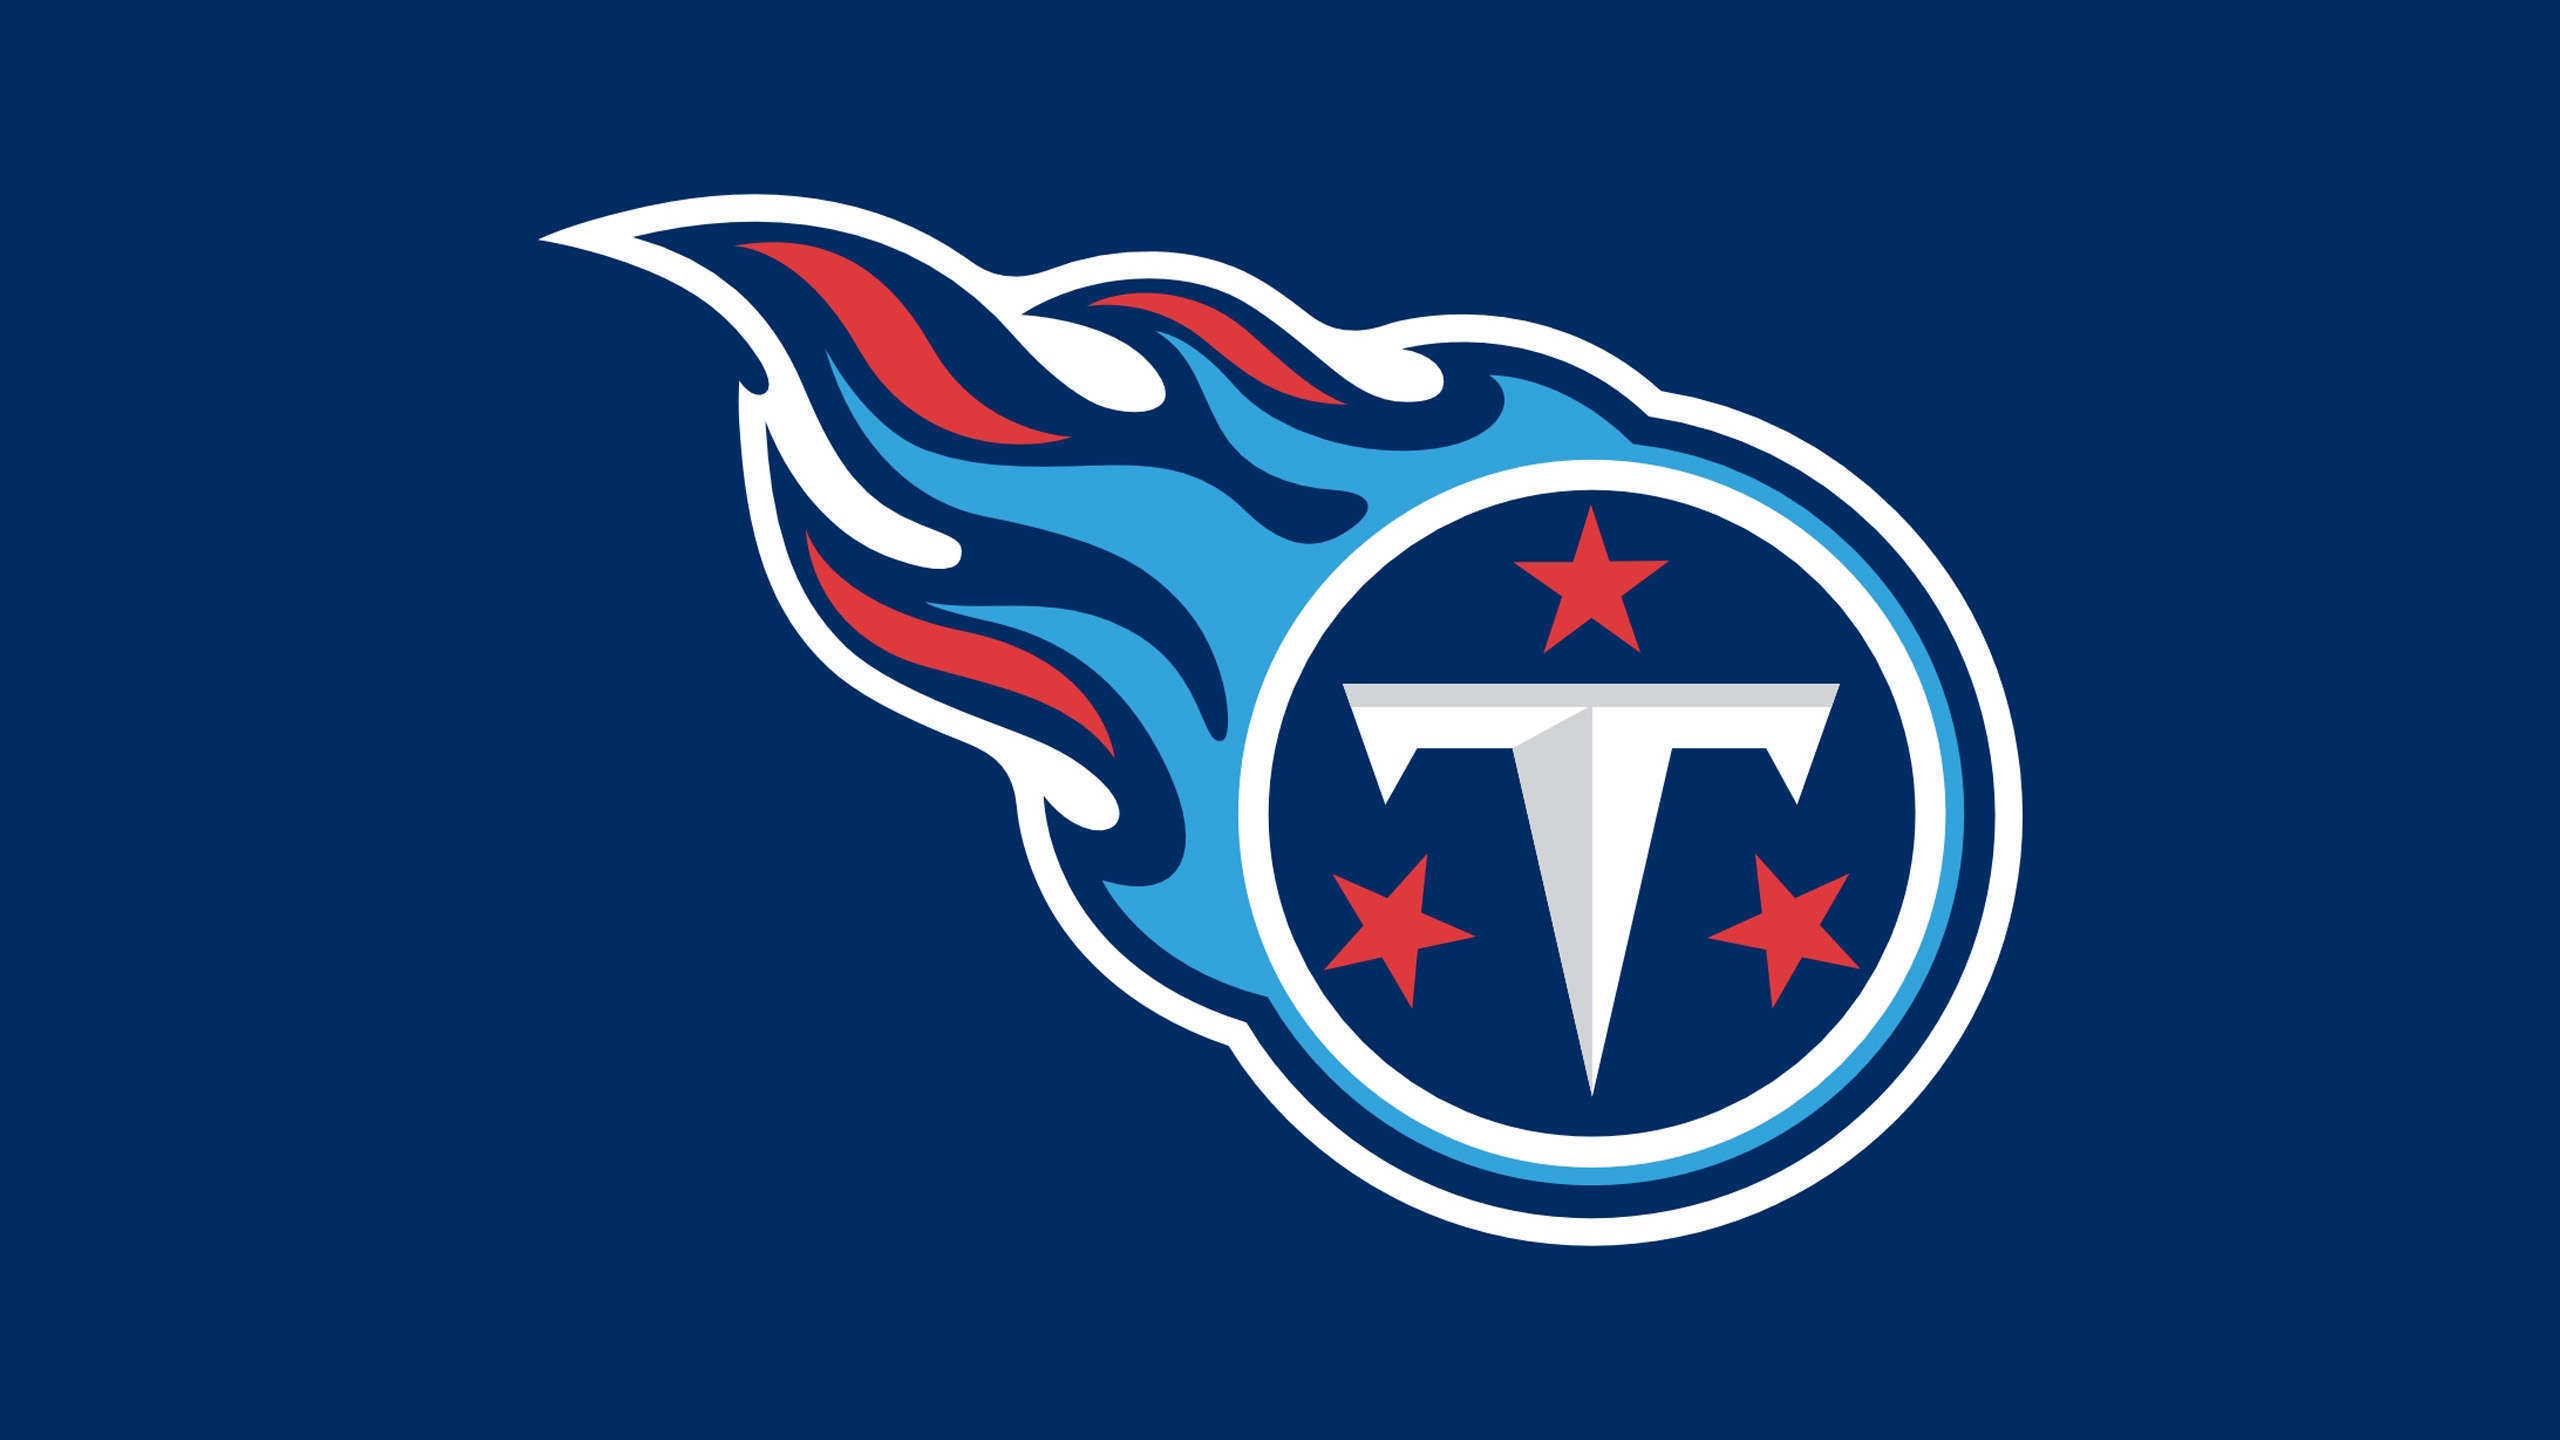 Tennessee Titans Logo for 2560x1440 HDTV resolution